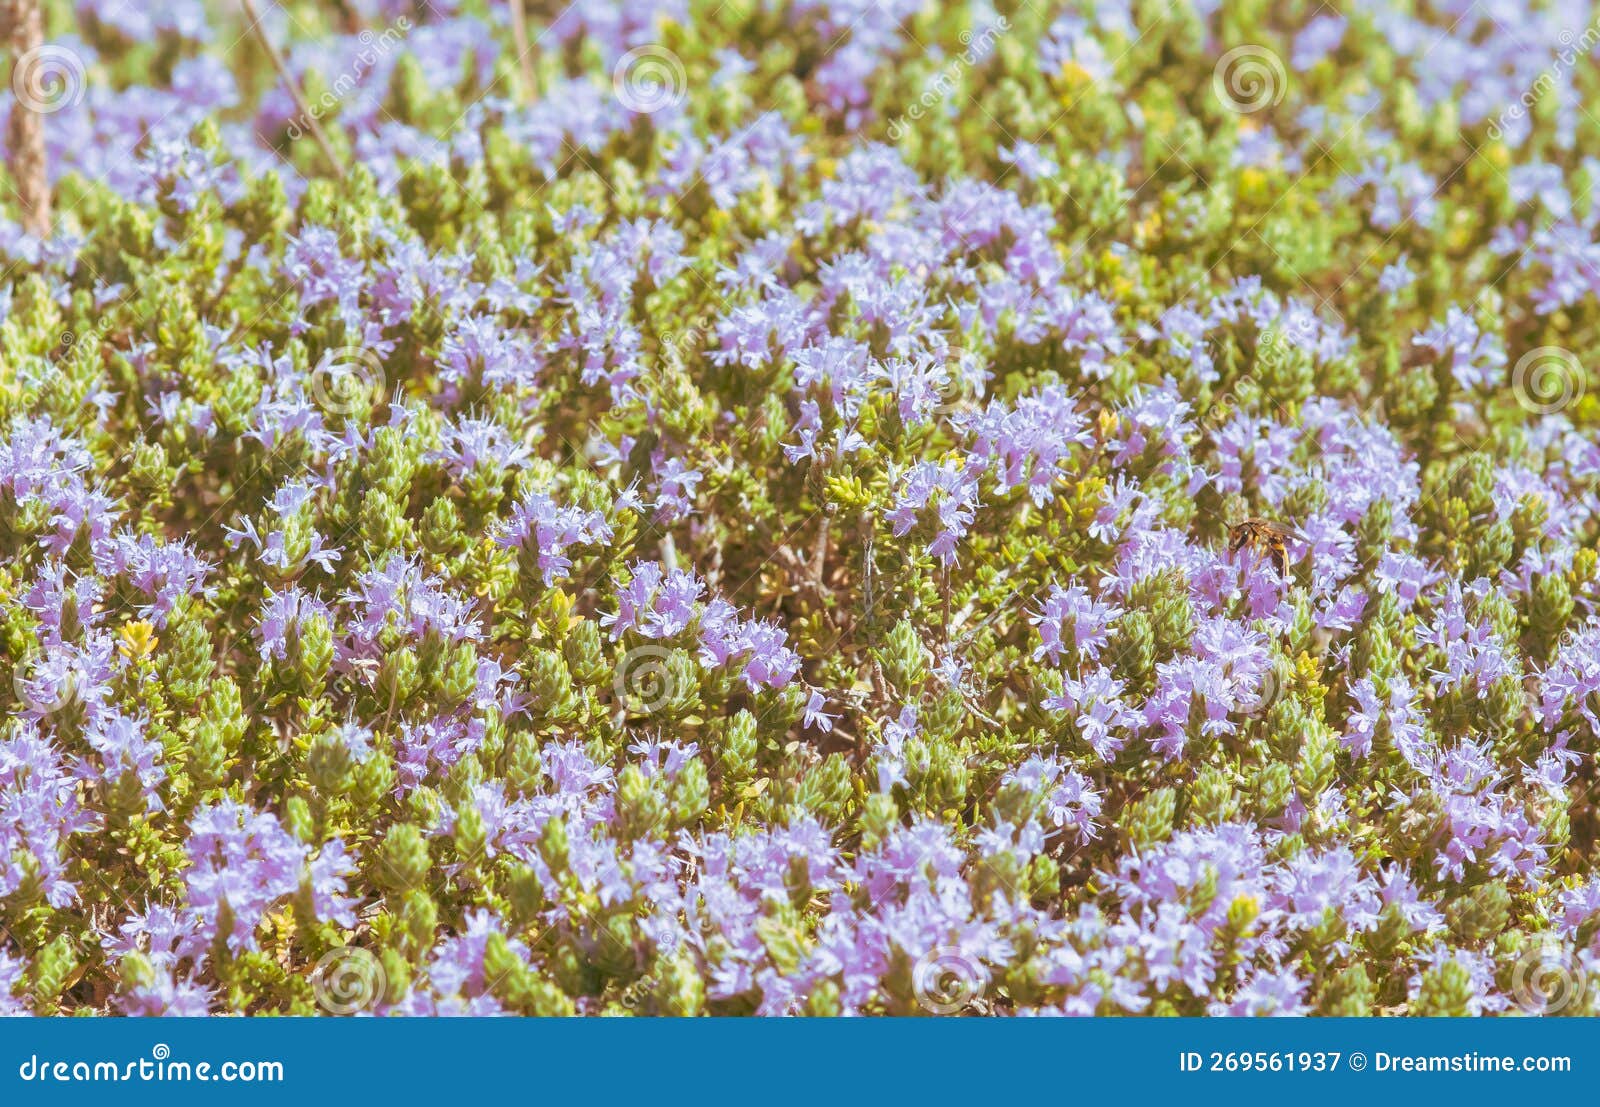 creeping plant with purple flowers on the rocky ground on a hot summer day.